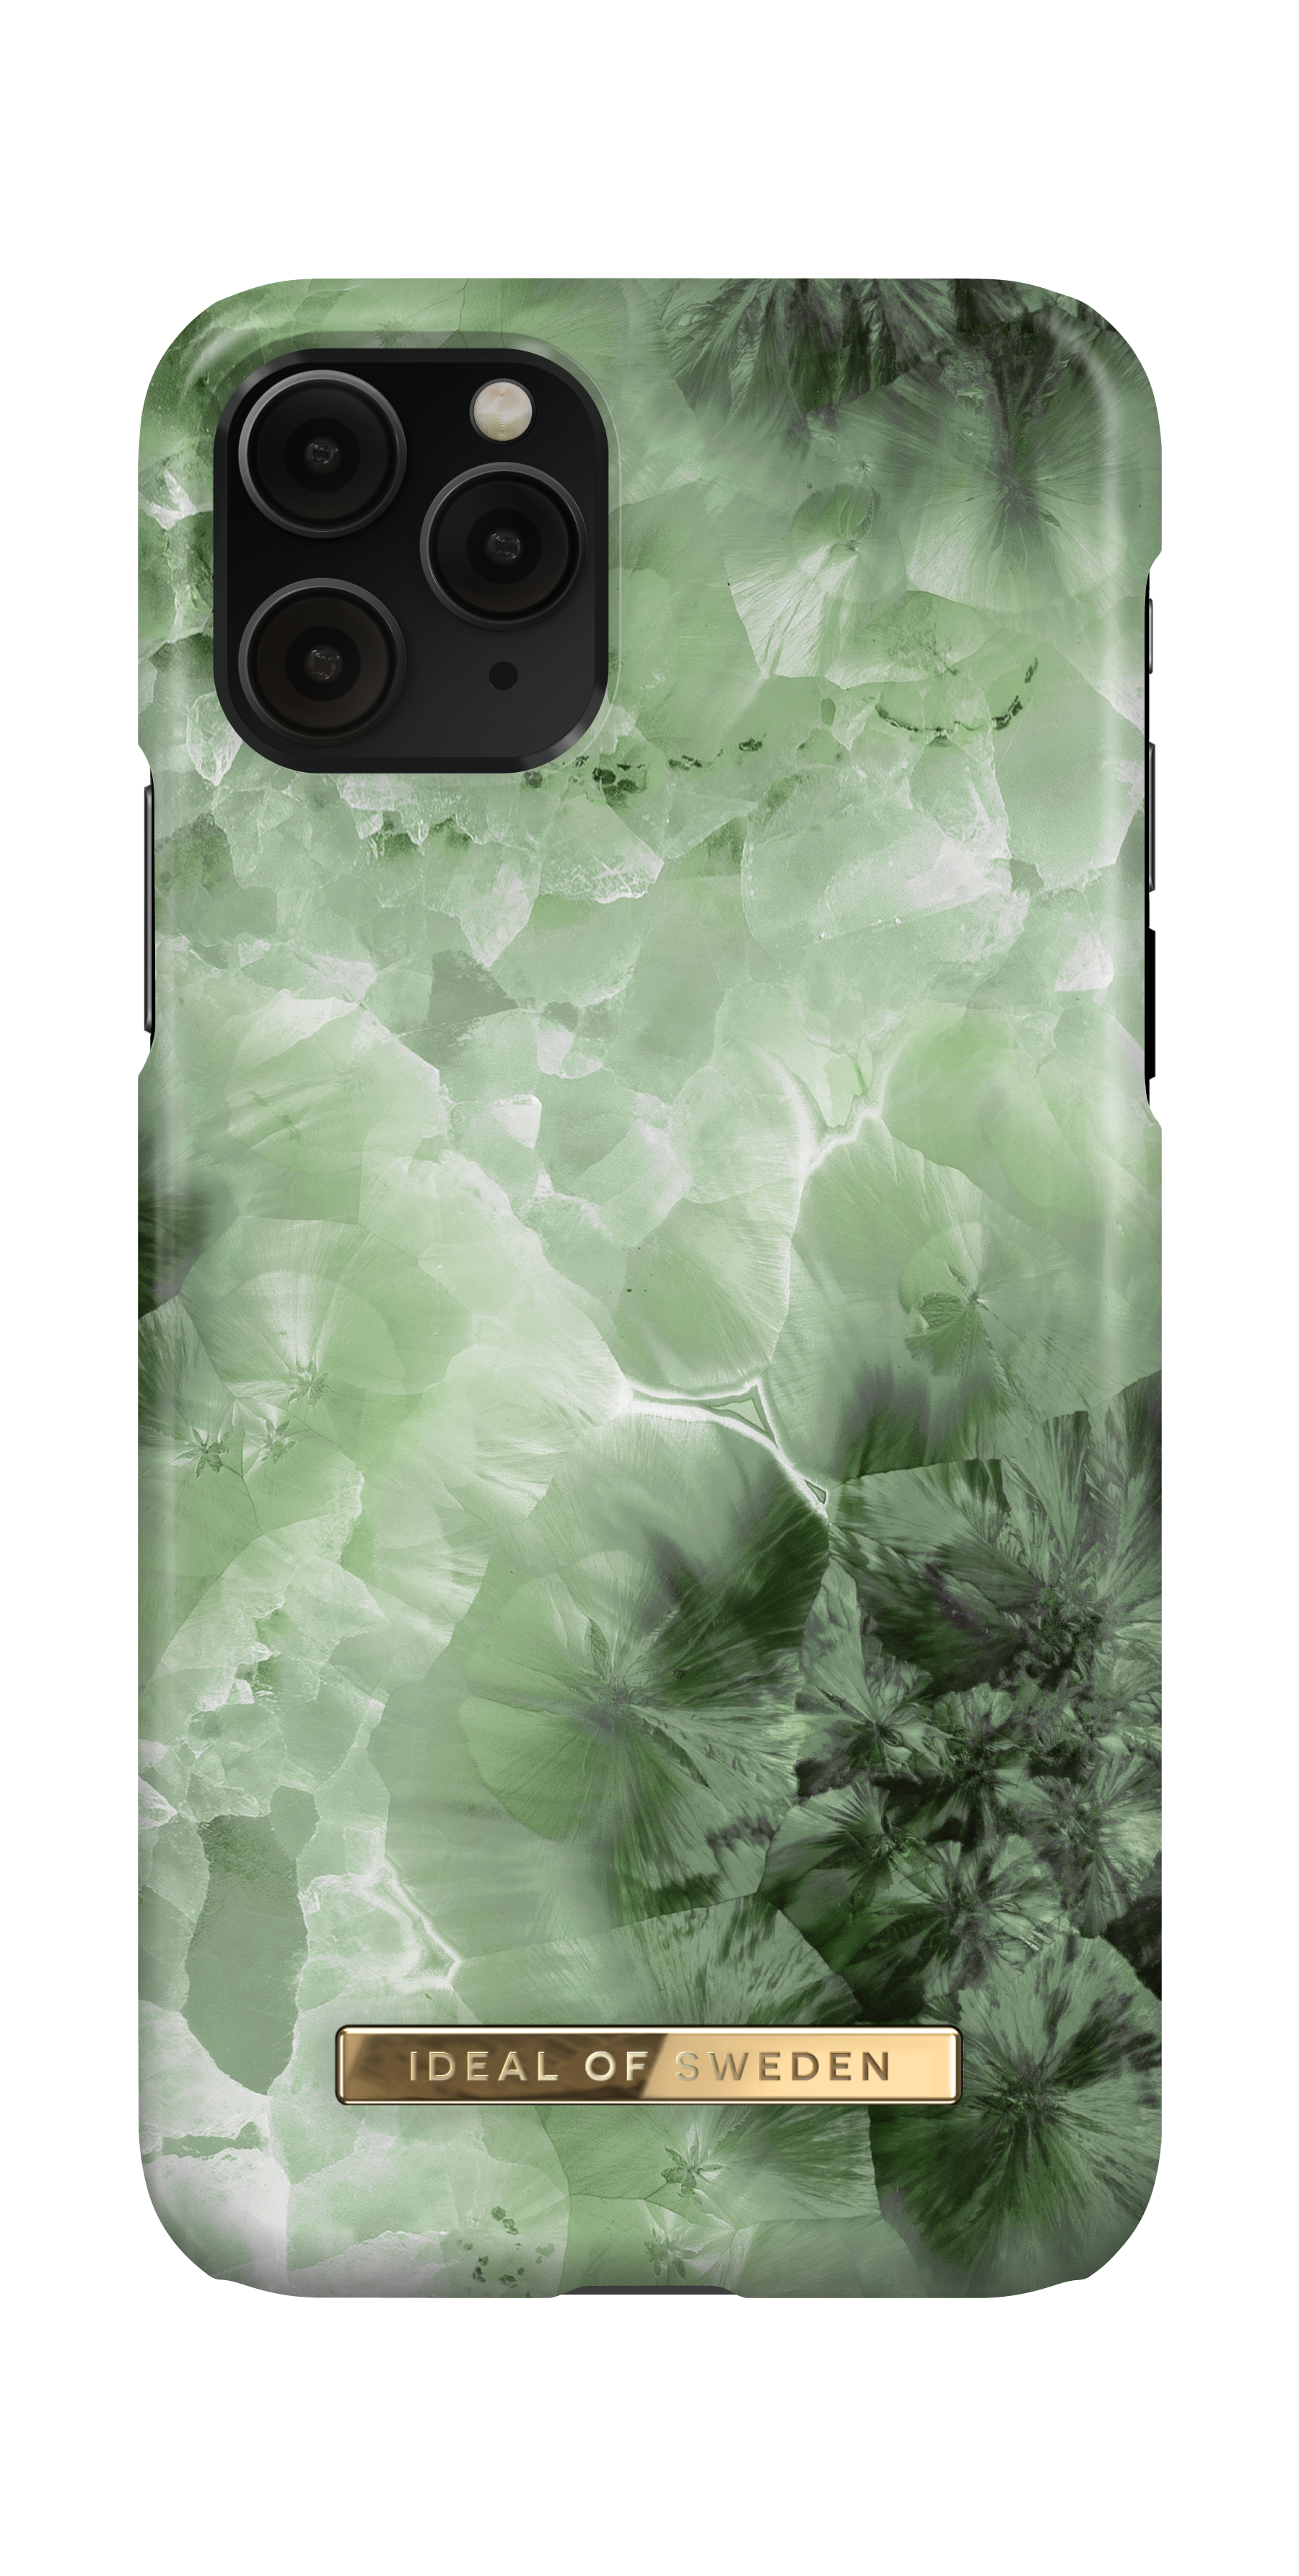 IDEAL OF Apple, Backcover, iPhone Sky X, Crystal Pro, Green iPhone 11 iPhone XS, SWEDEN IDFCAW20-1958-230